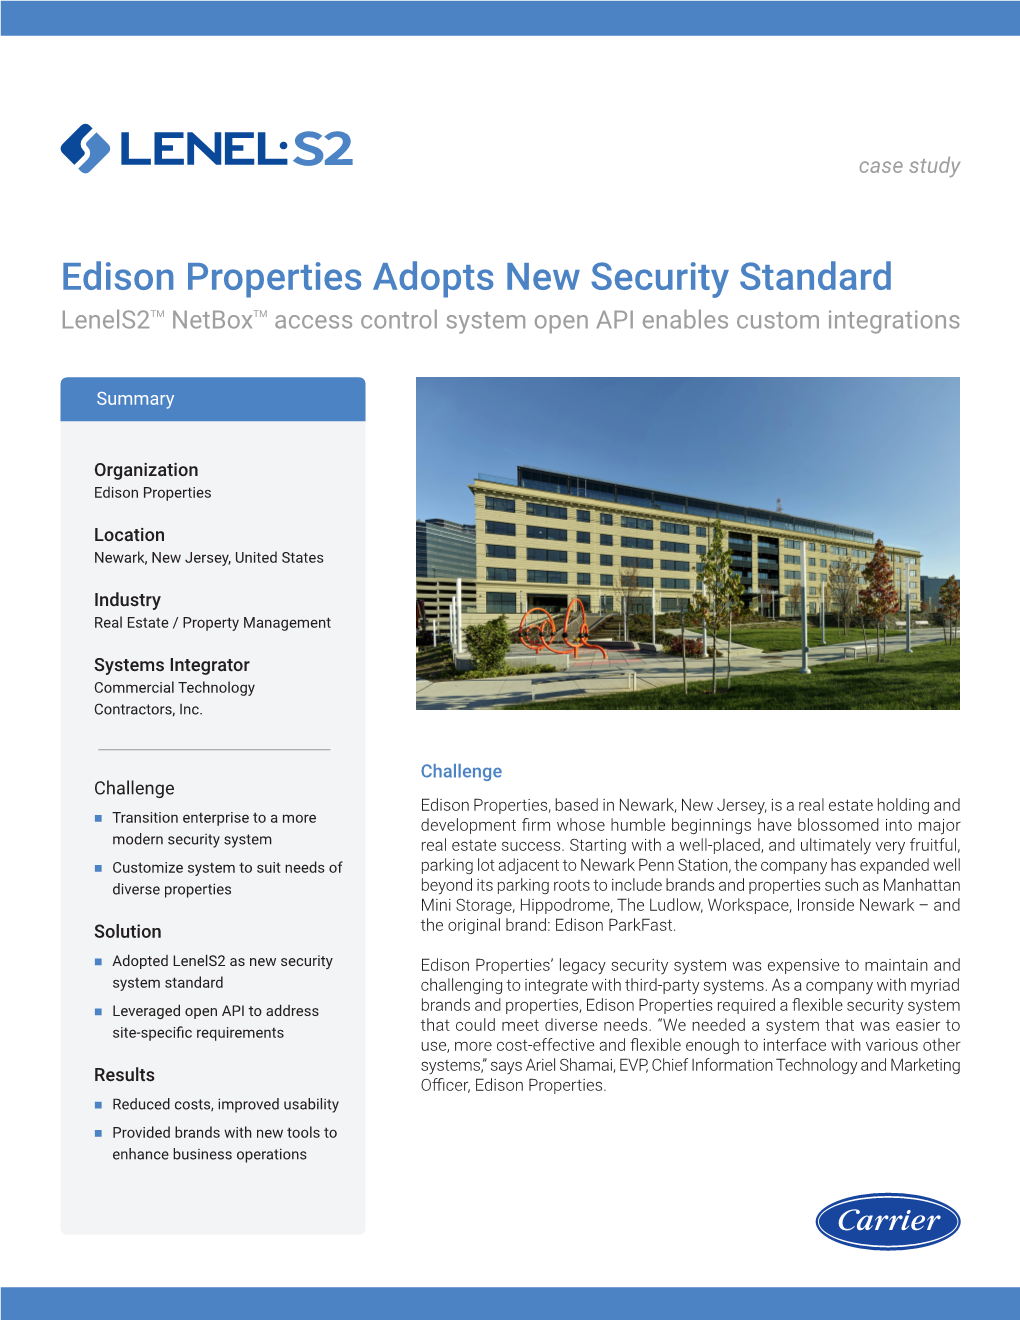 Edison Properties Adopts New Security Standard Lenels2tm Netboxtm Access Control System Open API Enables Custom Integrations